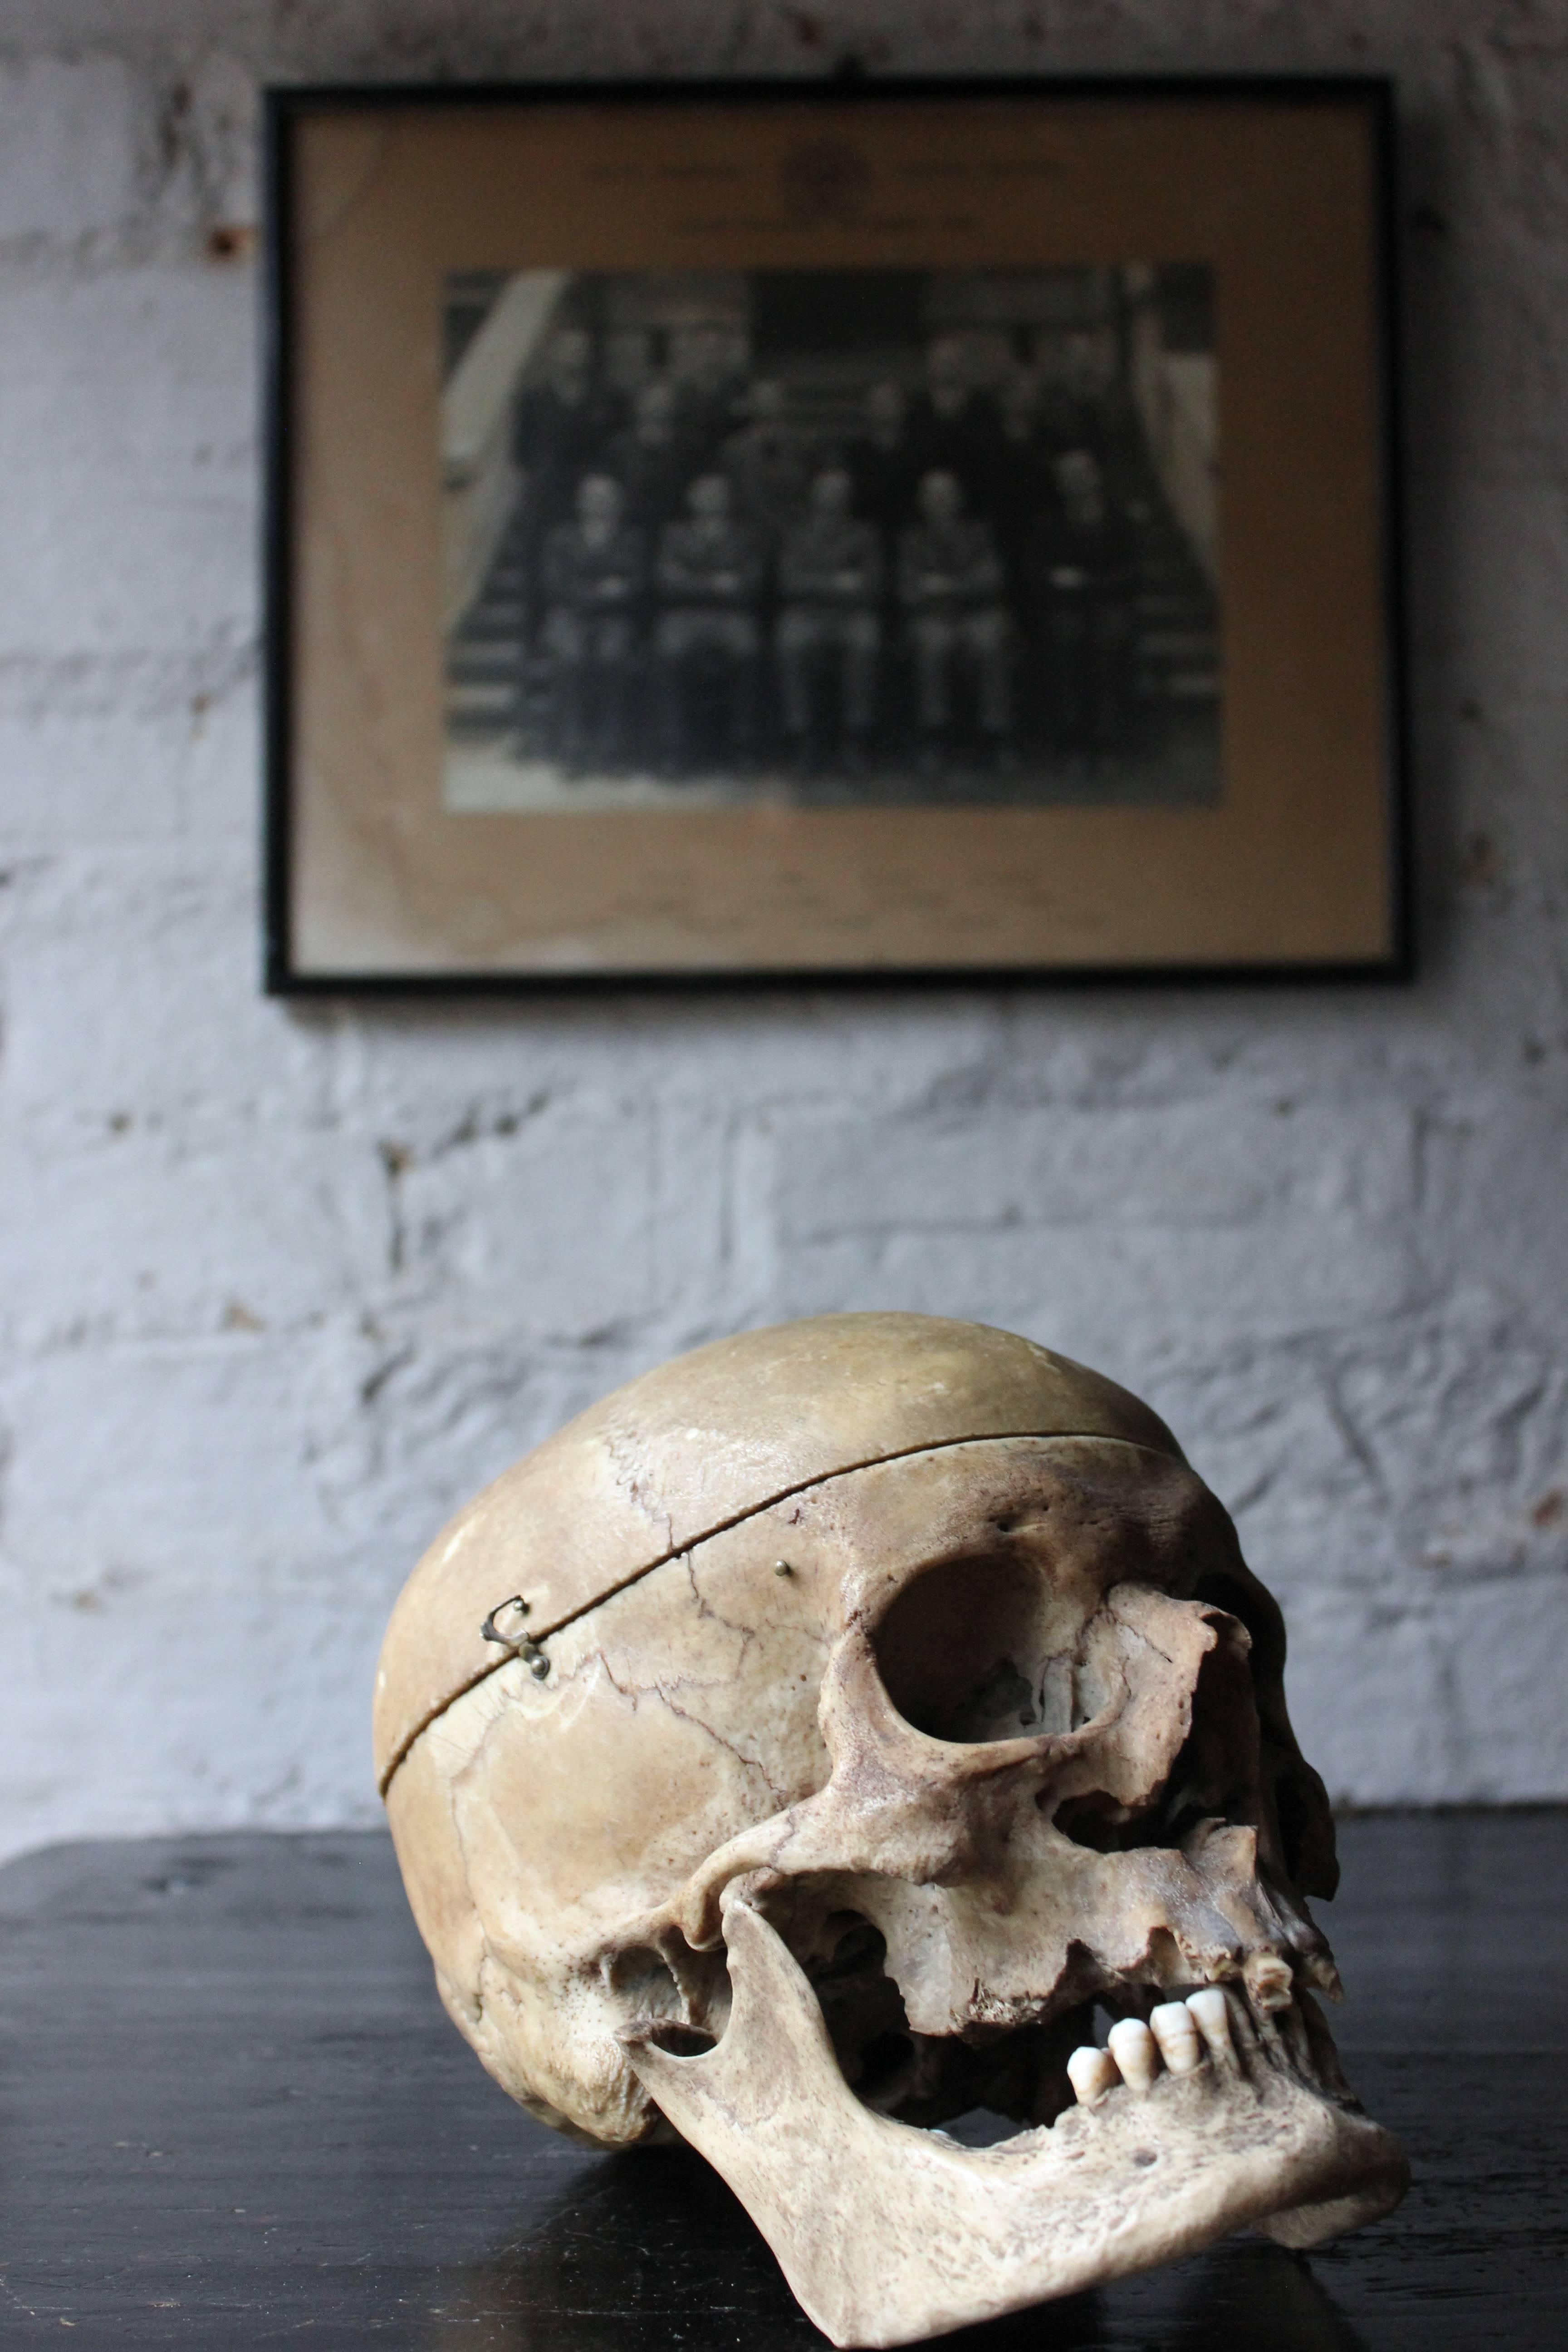 English Early 20thc Human Skull for Odontology and Medical Study from Guy's Hospital